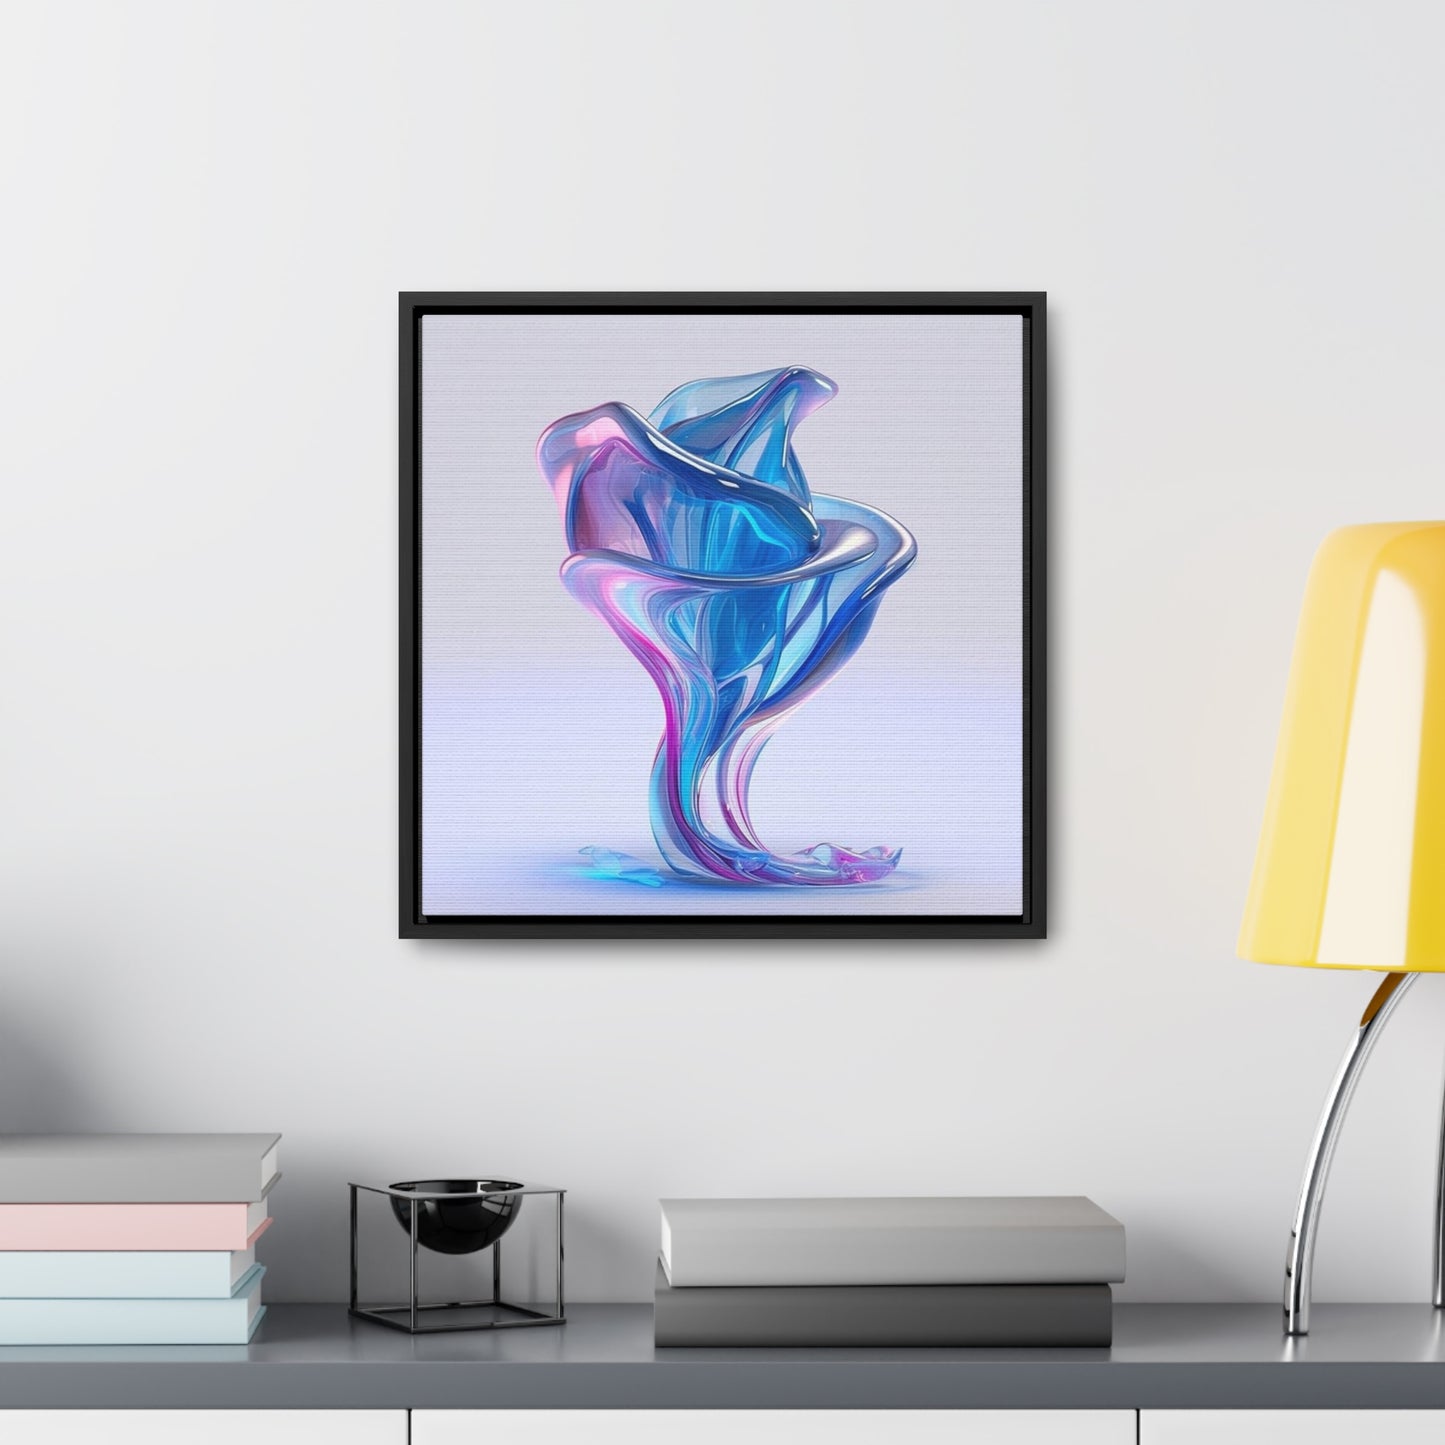 Gallery Canvas Wraps, Square Frame Pink & Blue Tulip Rose 2